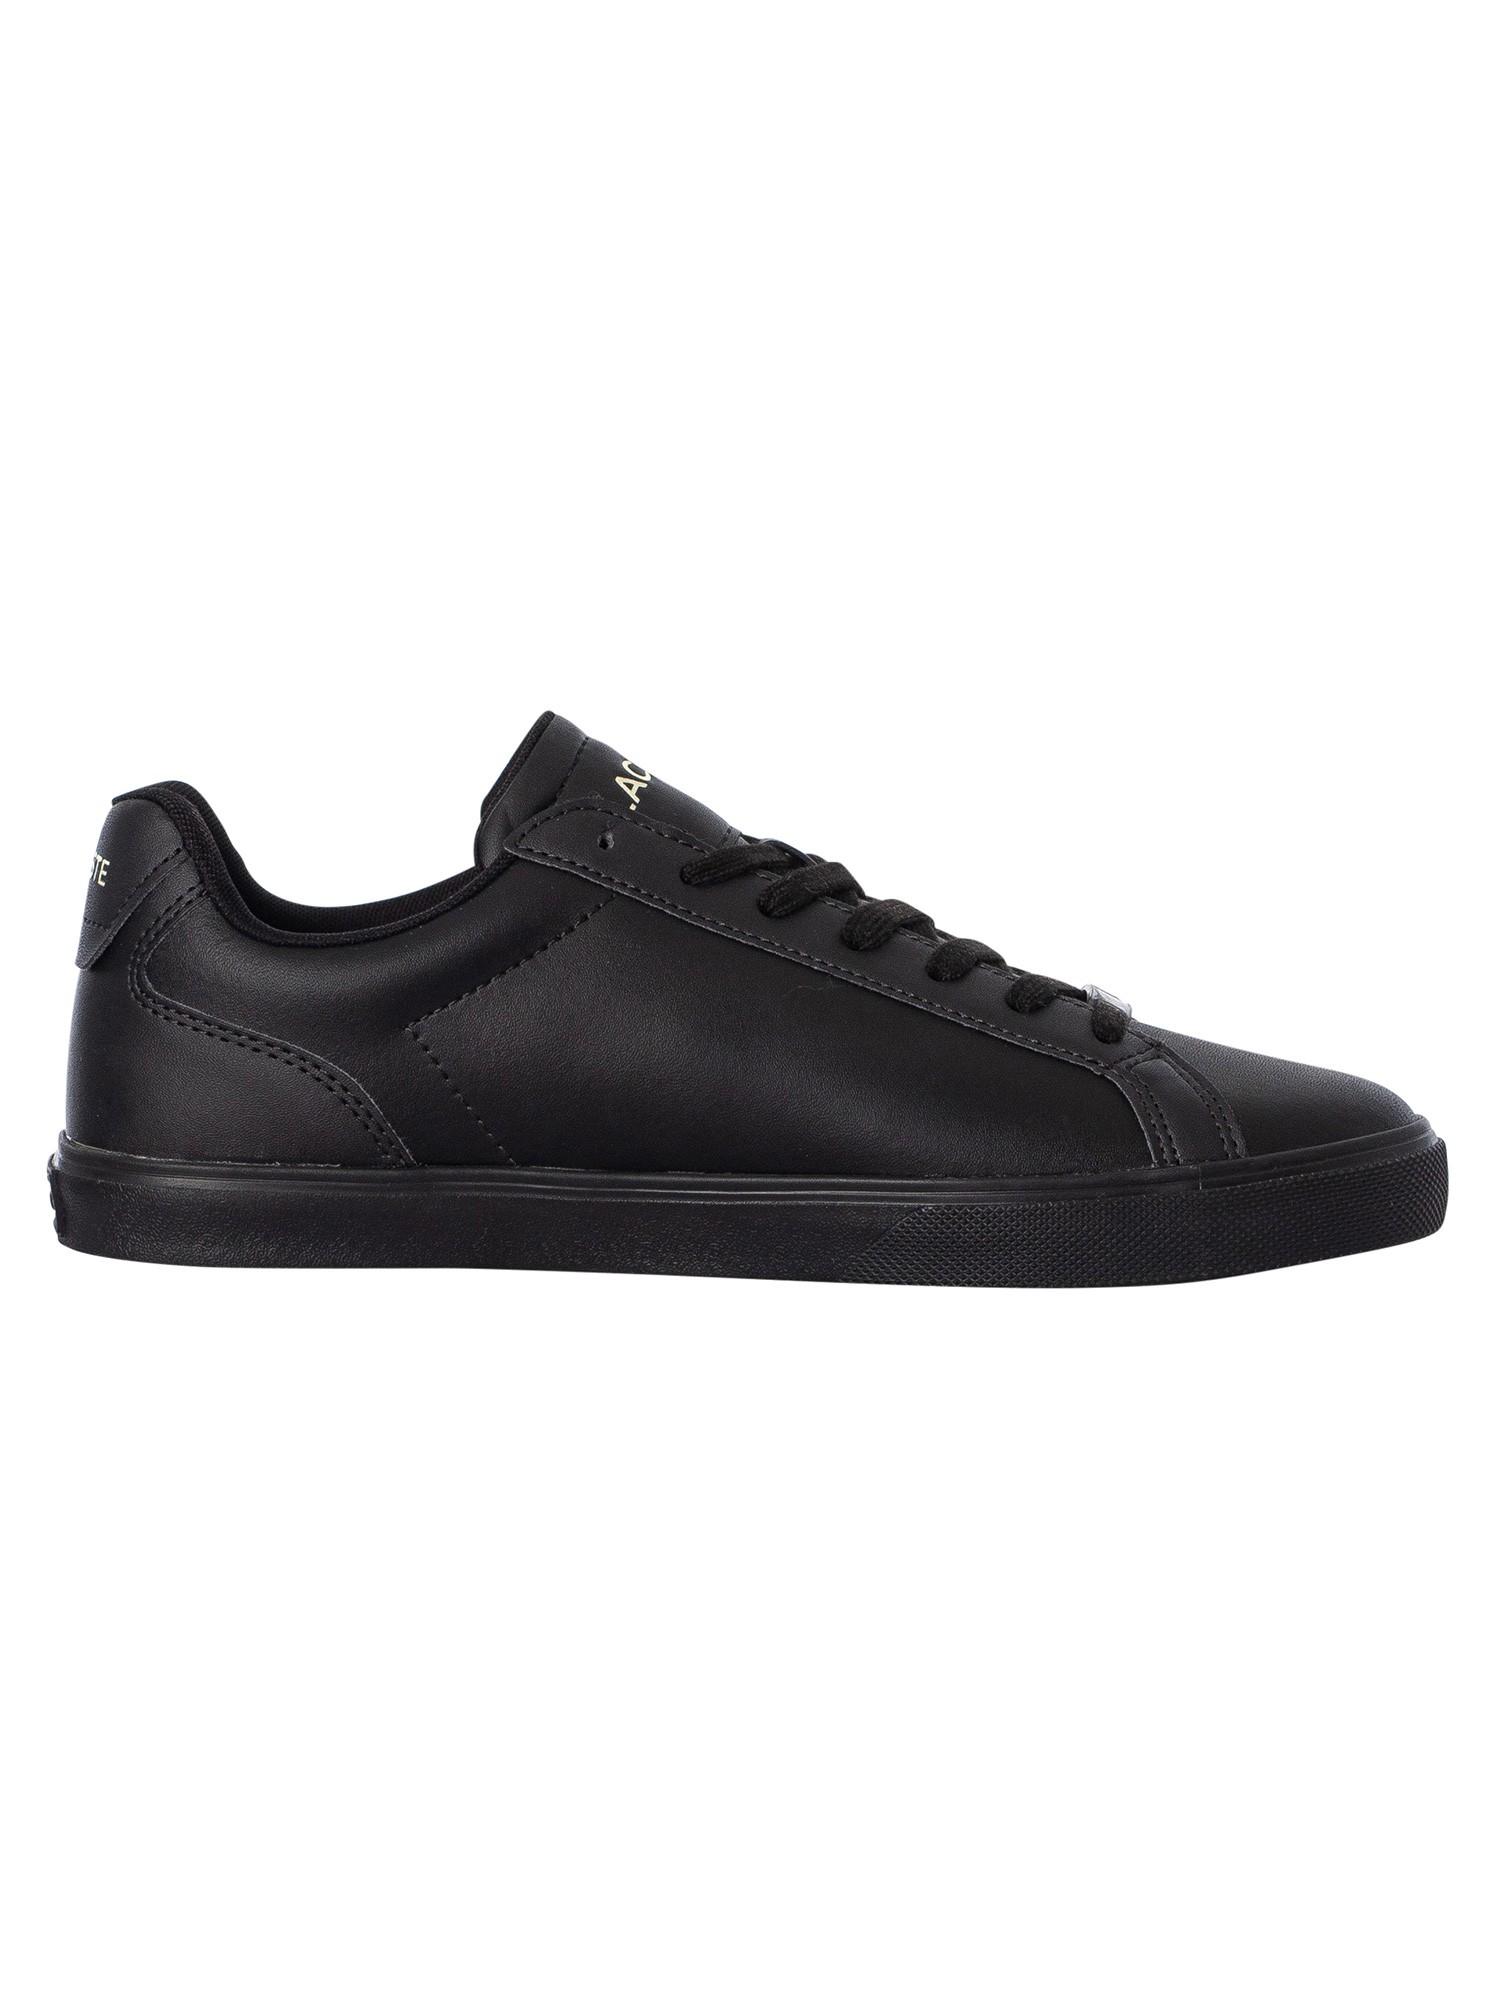 Mens Lacoste Trainers | White, Black Sneakers | House of Fraser